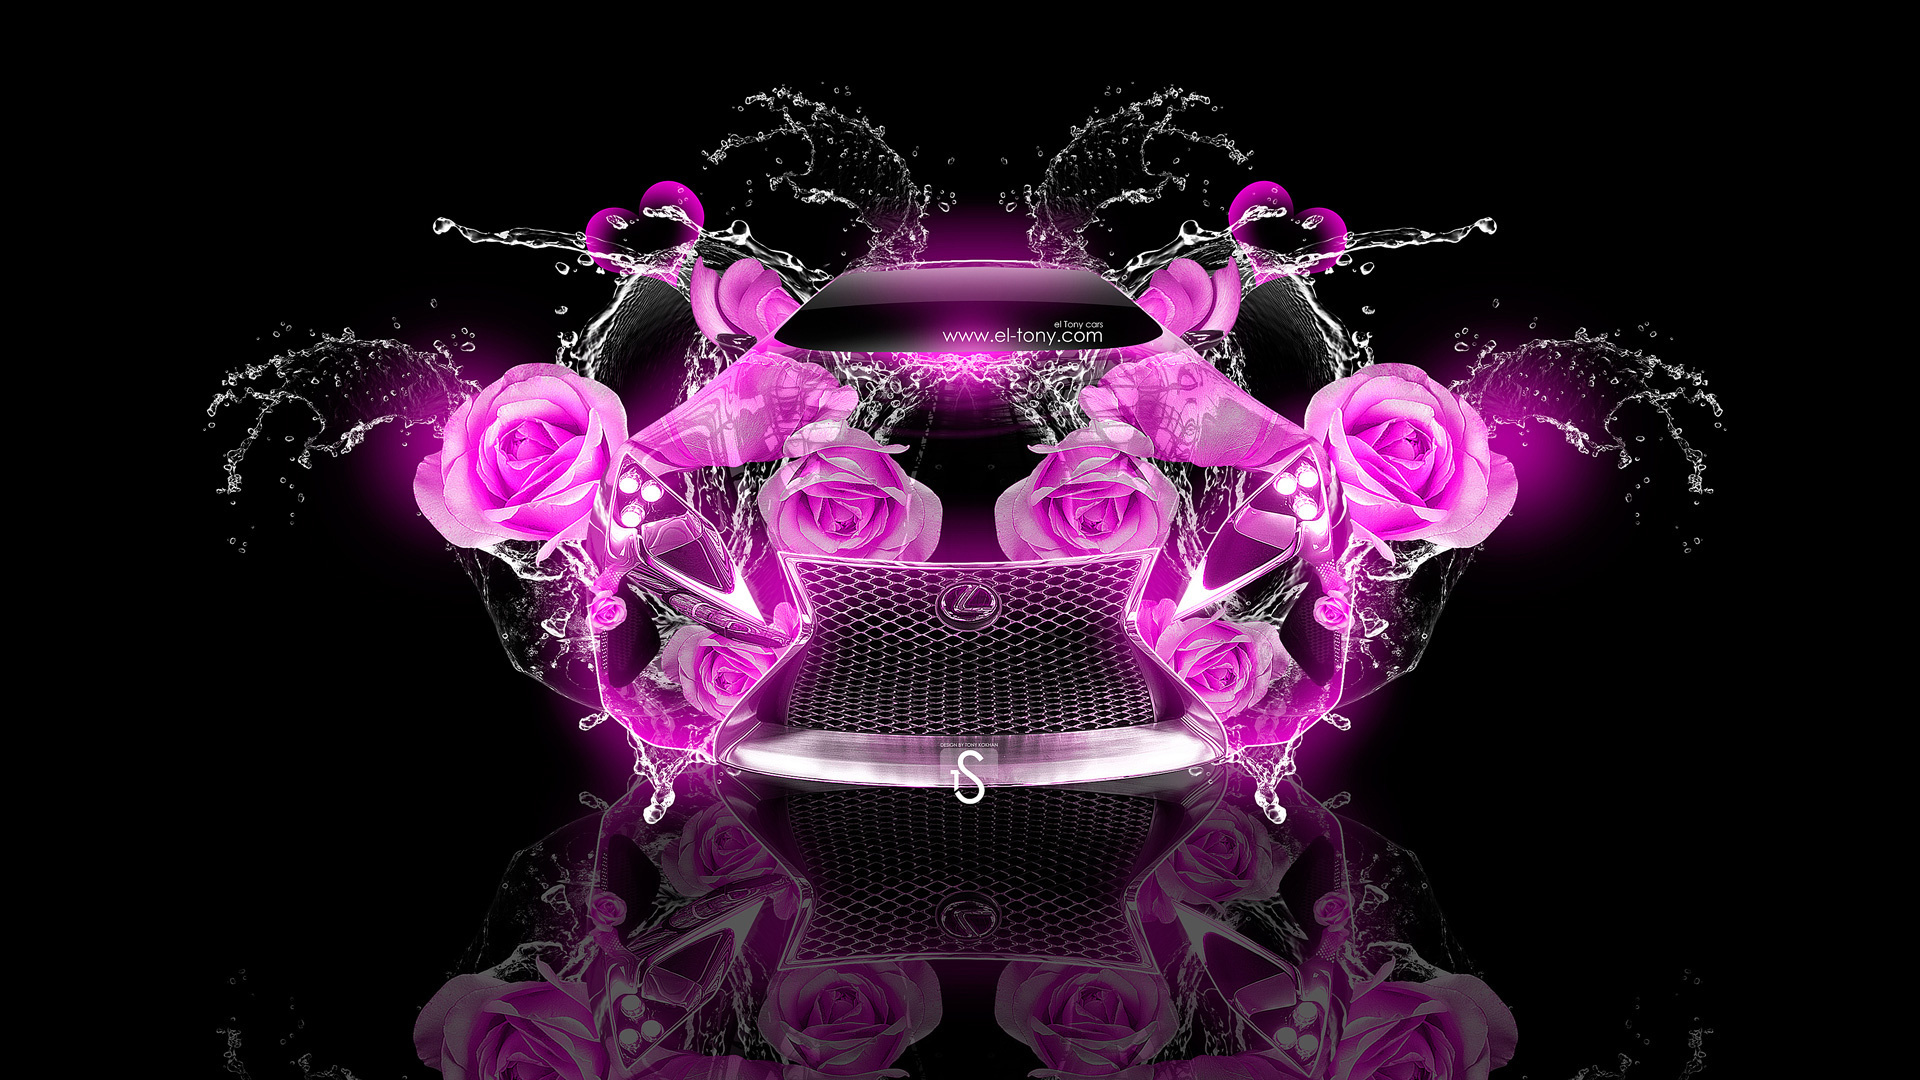 tony kokhan, lexus, lf-lc, fantasy, flowers, rose, pink, neon, colors, water, black, el tony cars, art, glamour, hd wallpapers, design, style,  , , , , , , , , , , , , , 